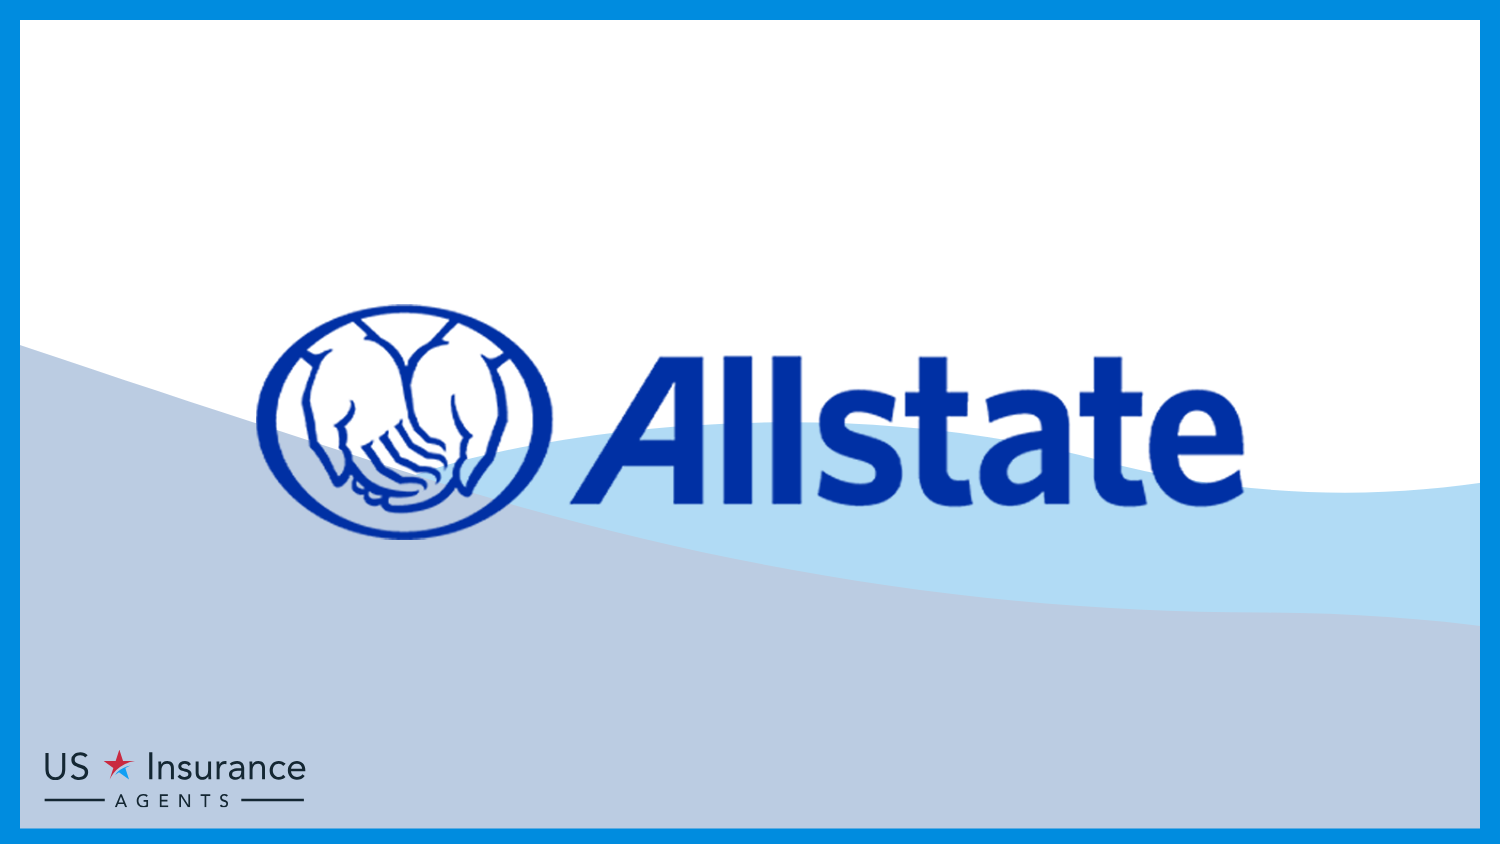 Best Whole Life Insurance : Allstate 